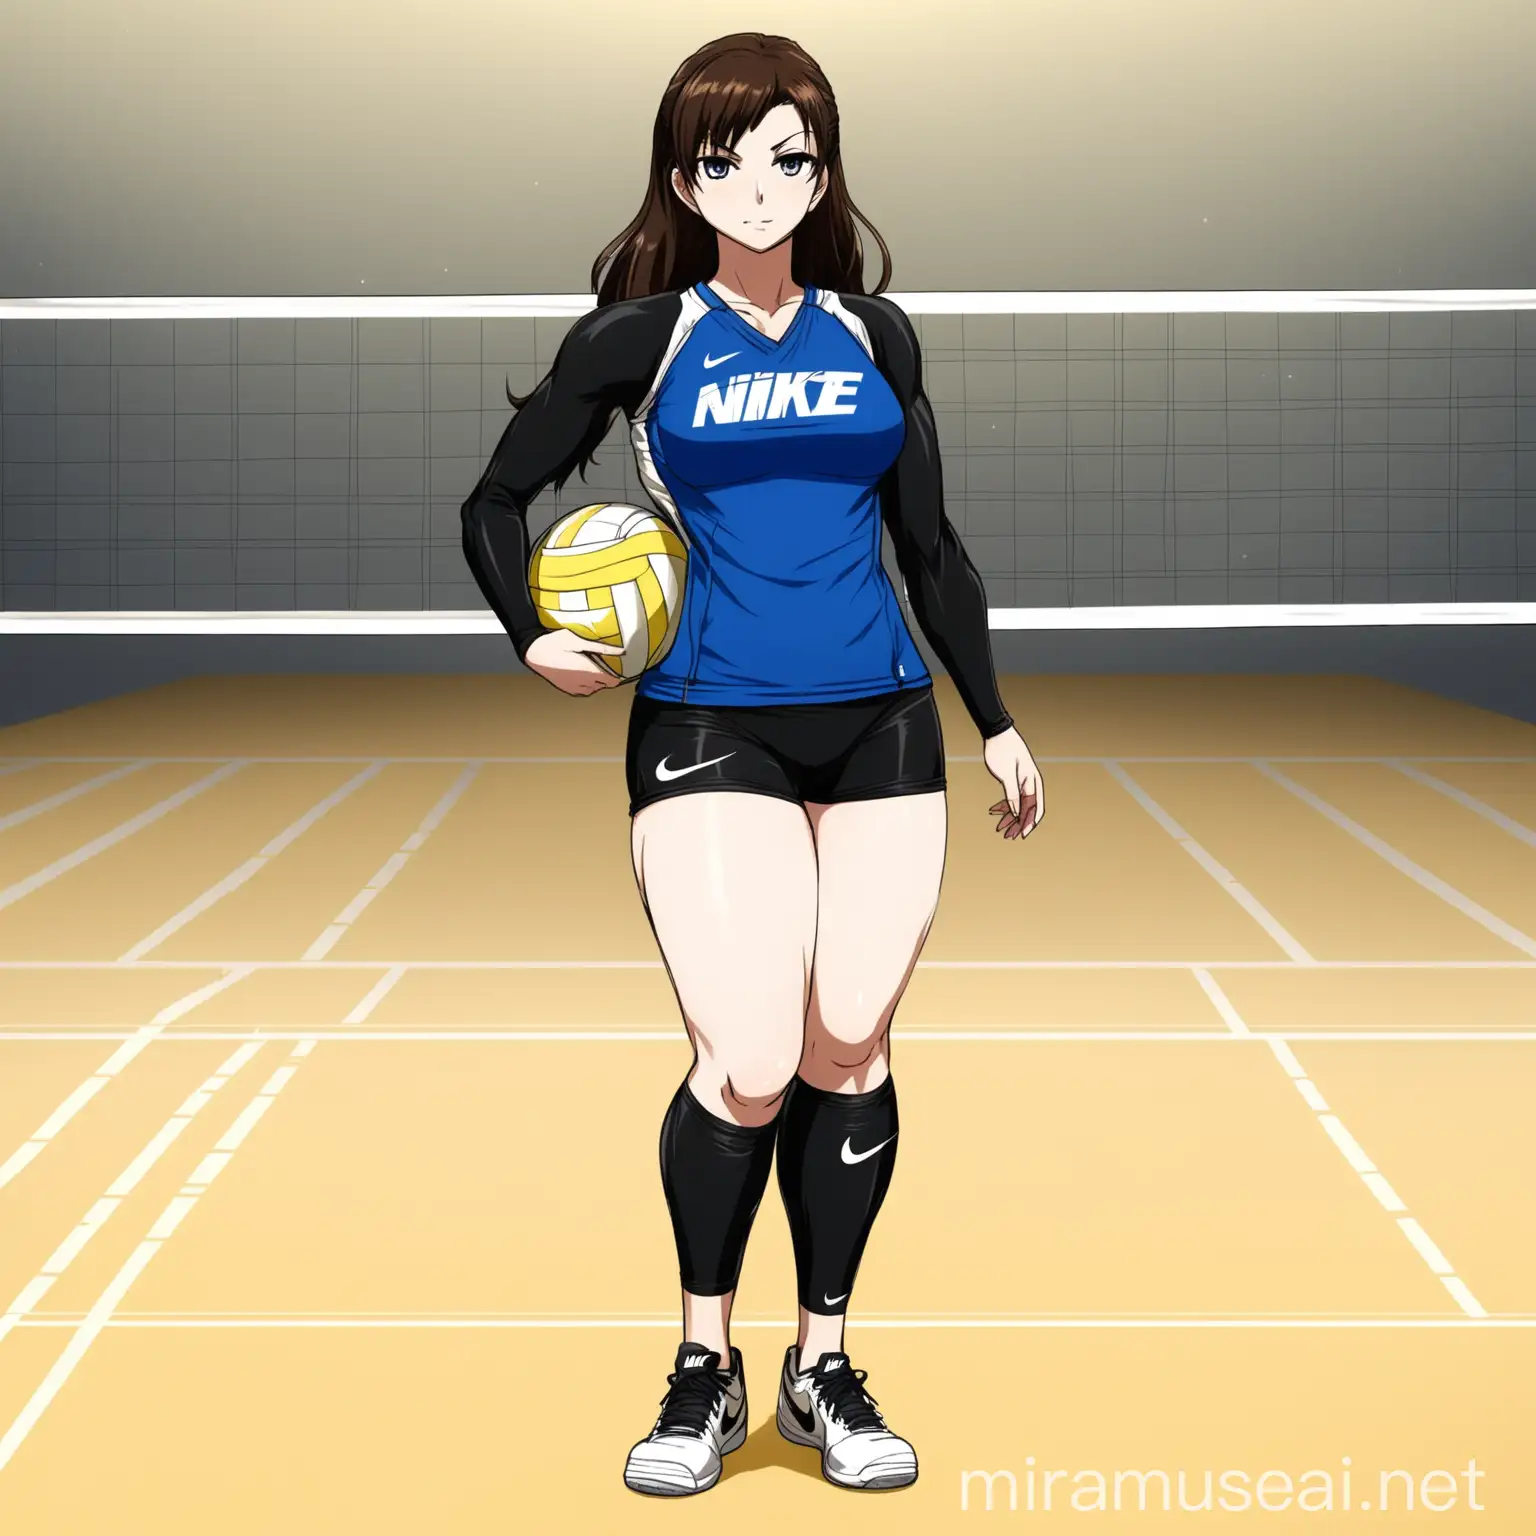 Anime High School Girl in Nike Pros on Volleyball Court